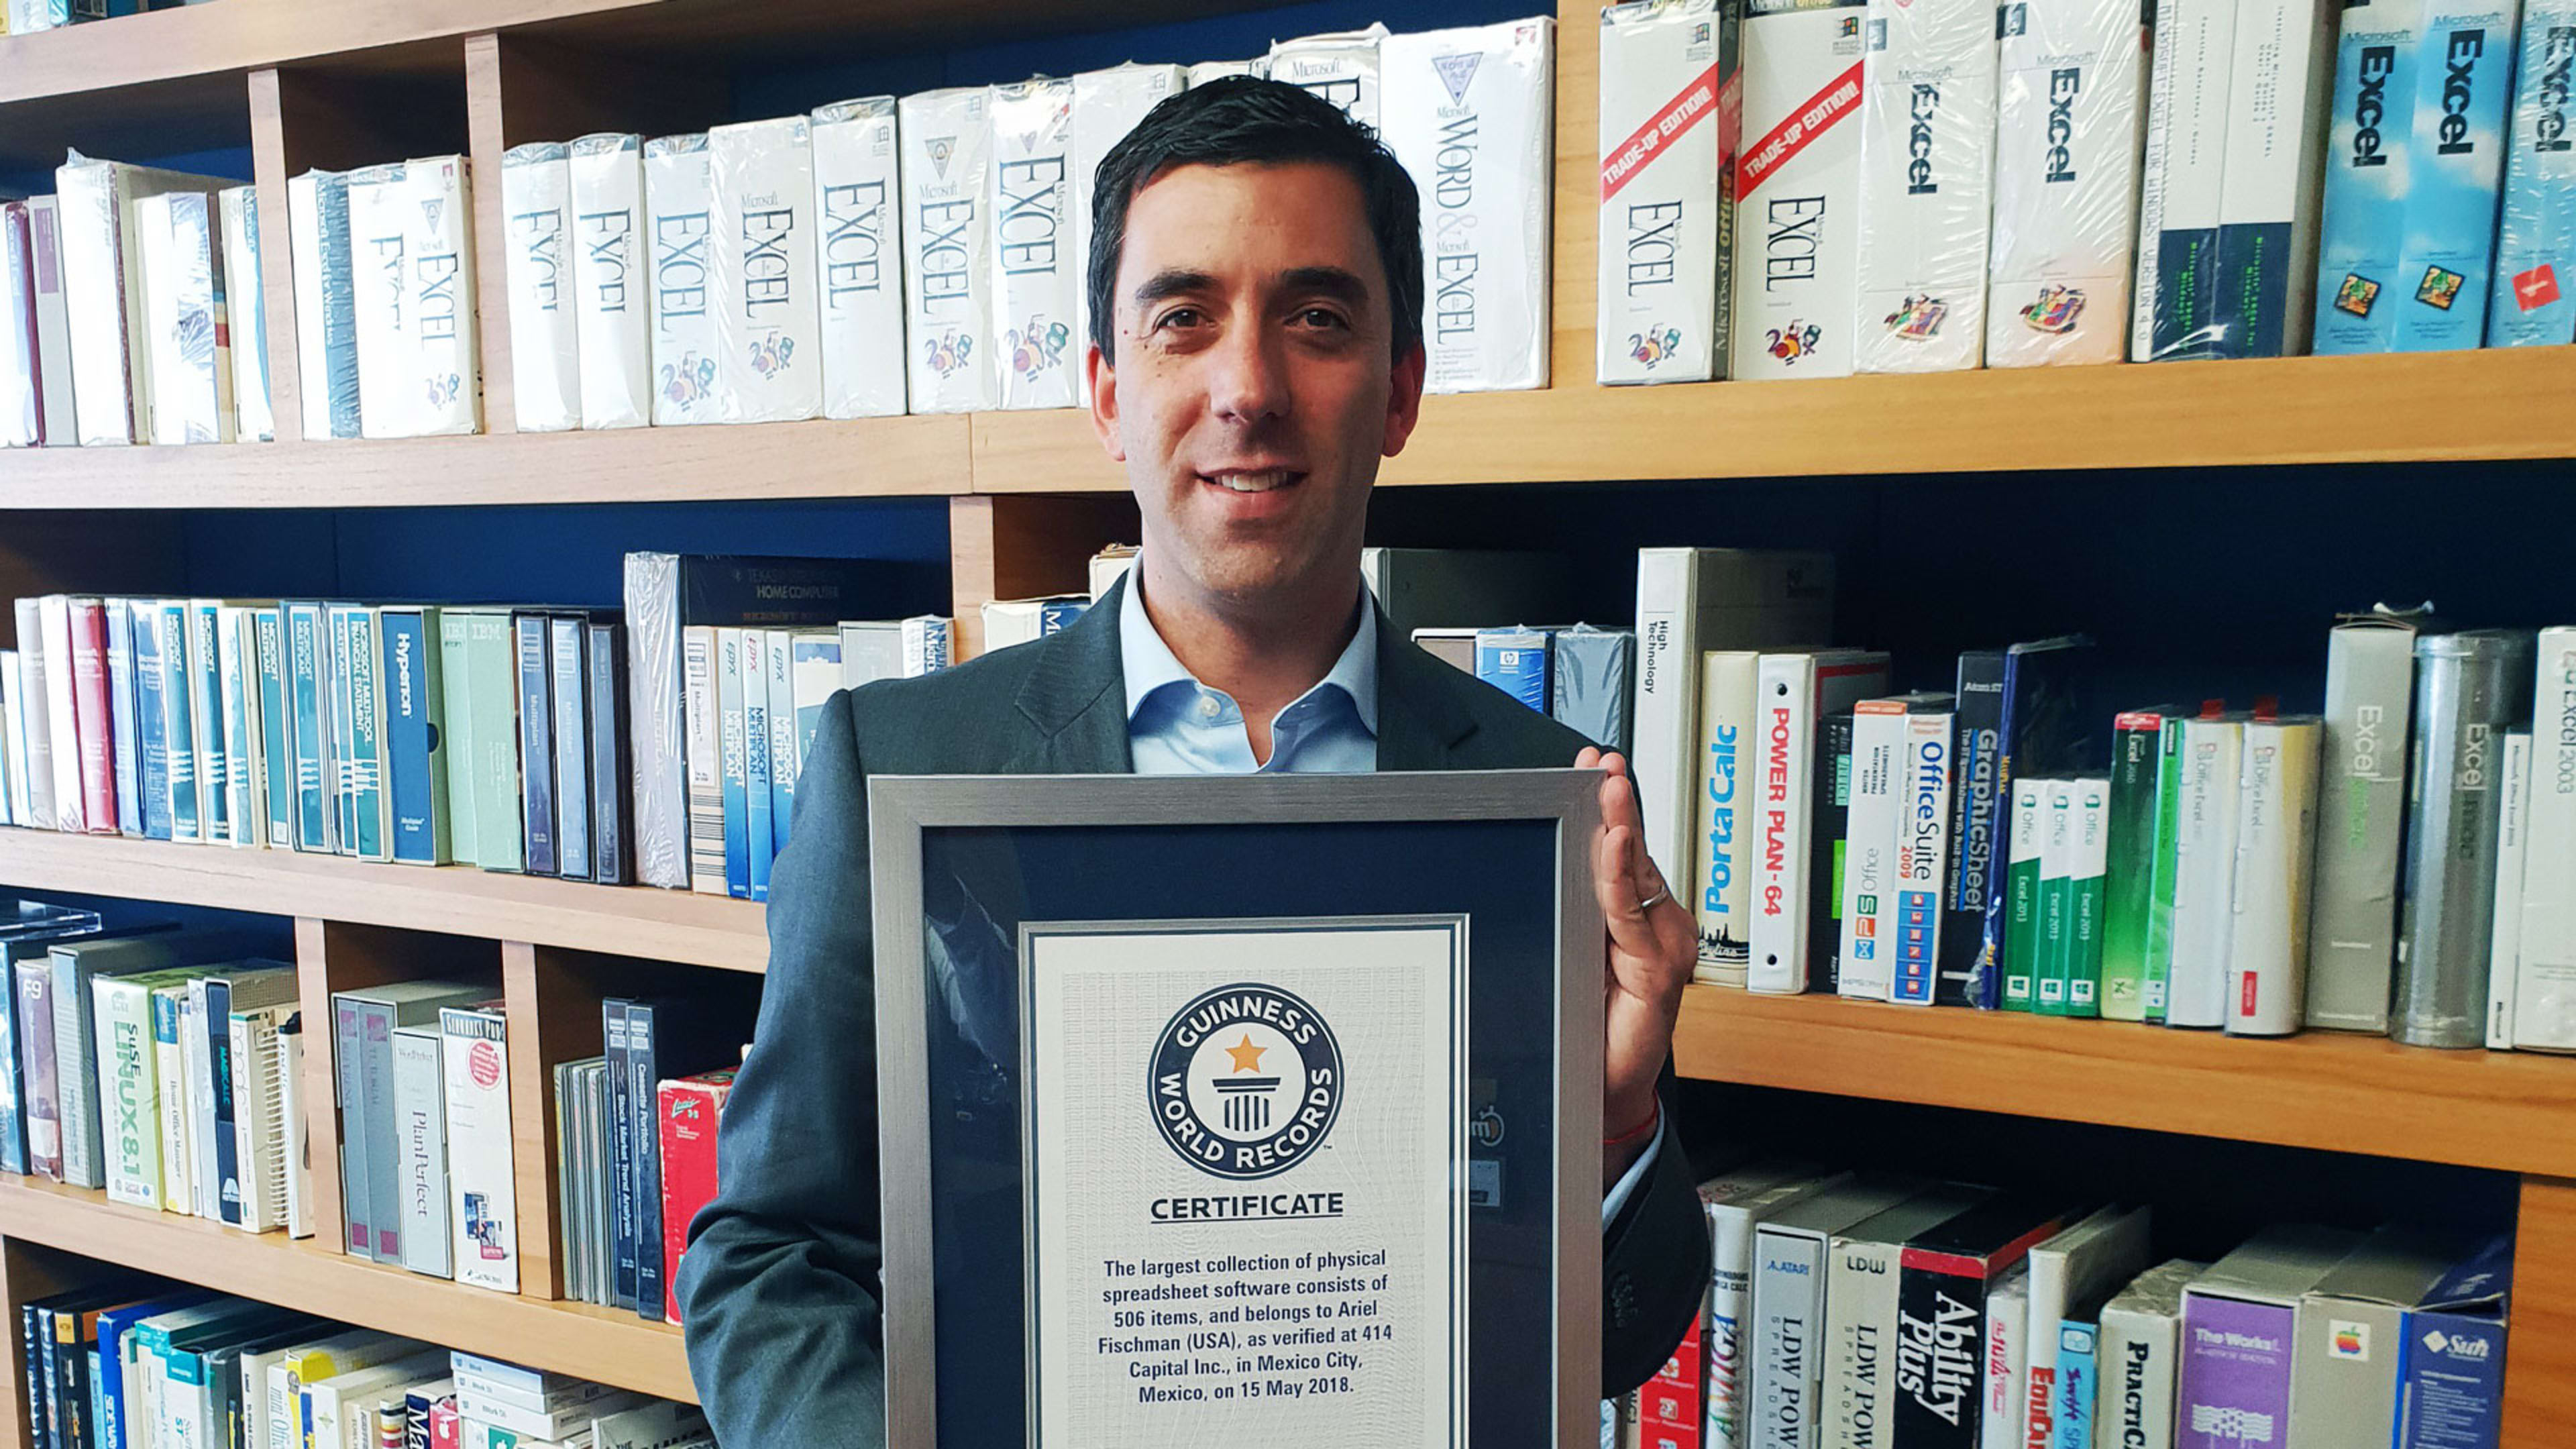 This guy holds the Guinness World Record for collecting spreadsheets